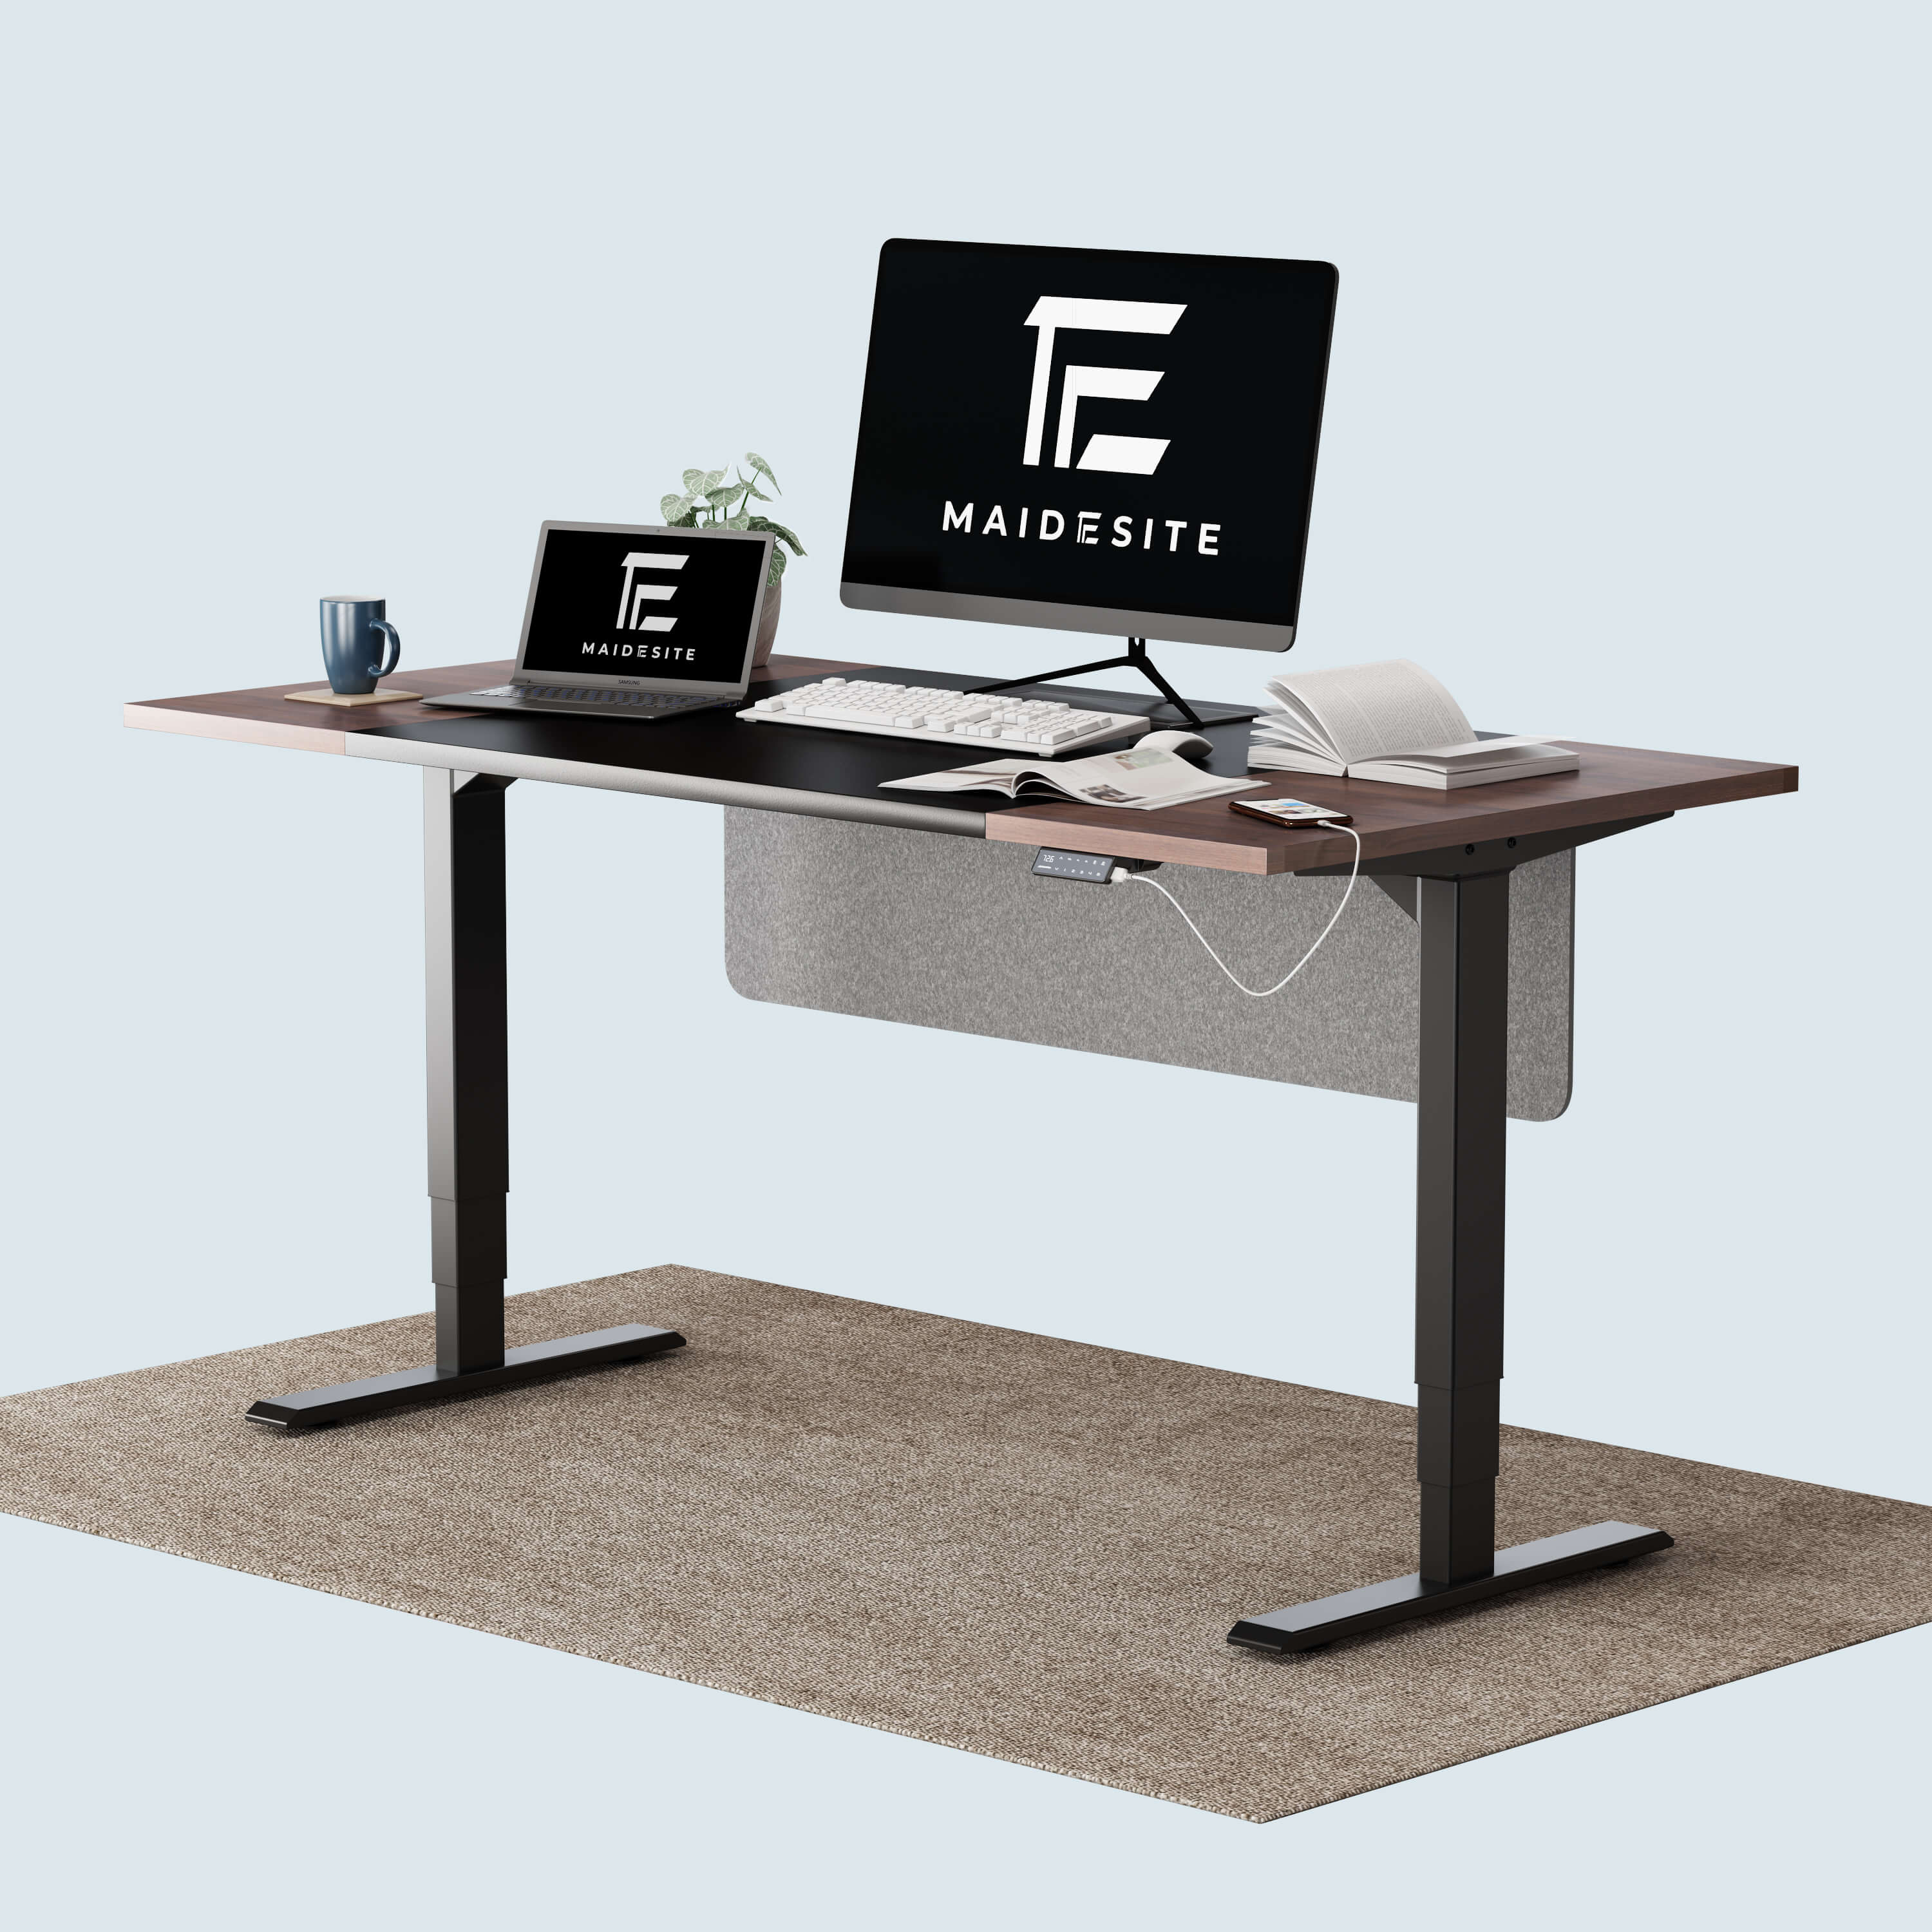 Maidesite SC2 Pro - Electric Height Adjustable Sit-Stand Desk 160x80/180x80 cm